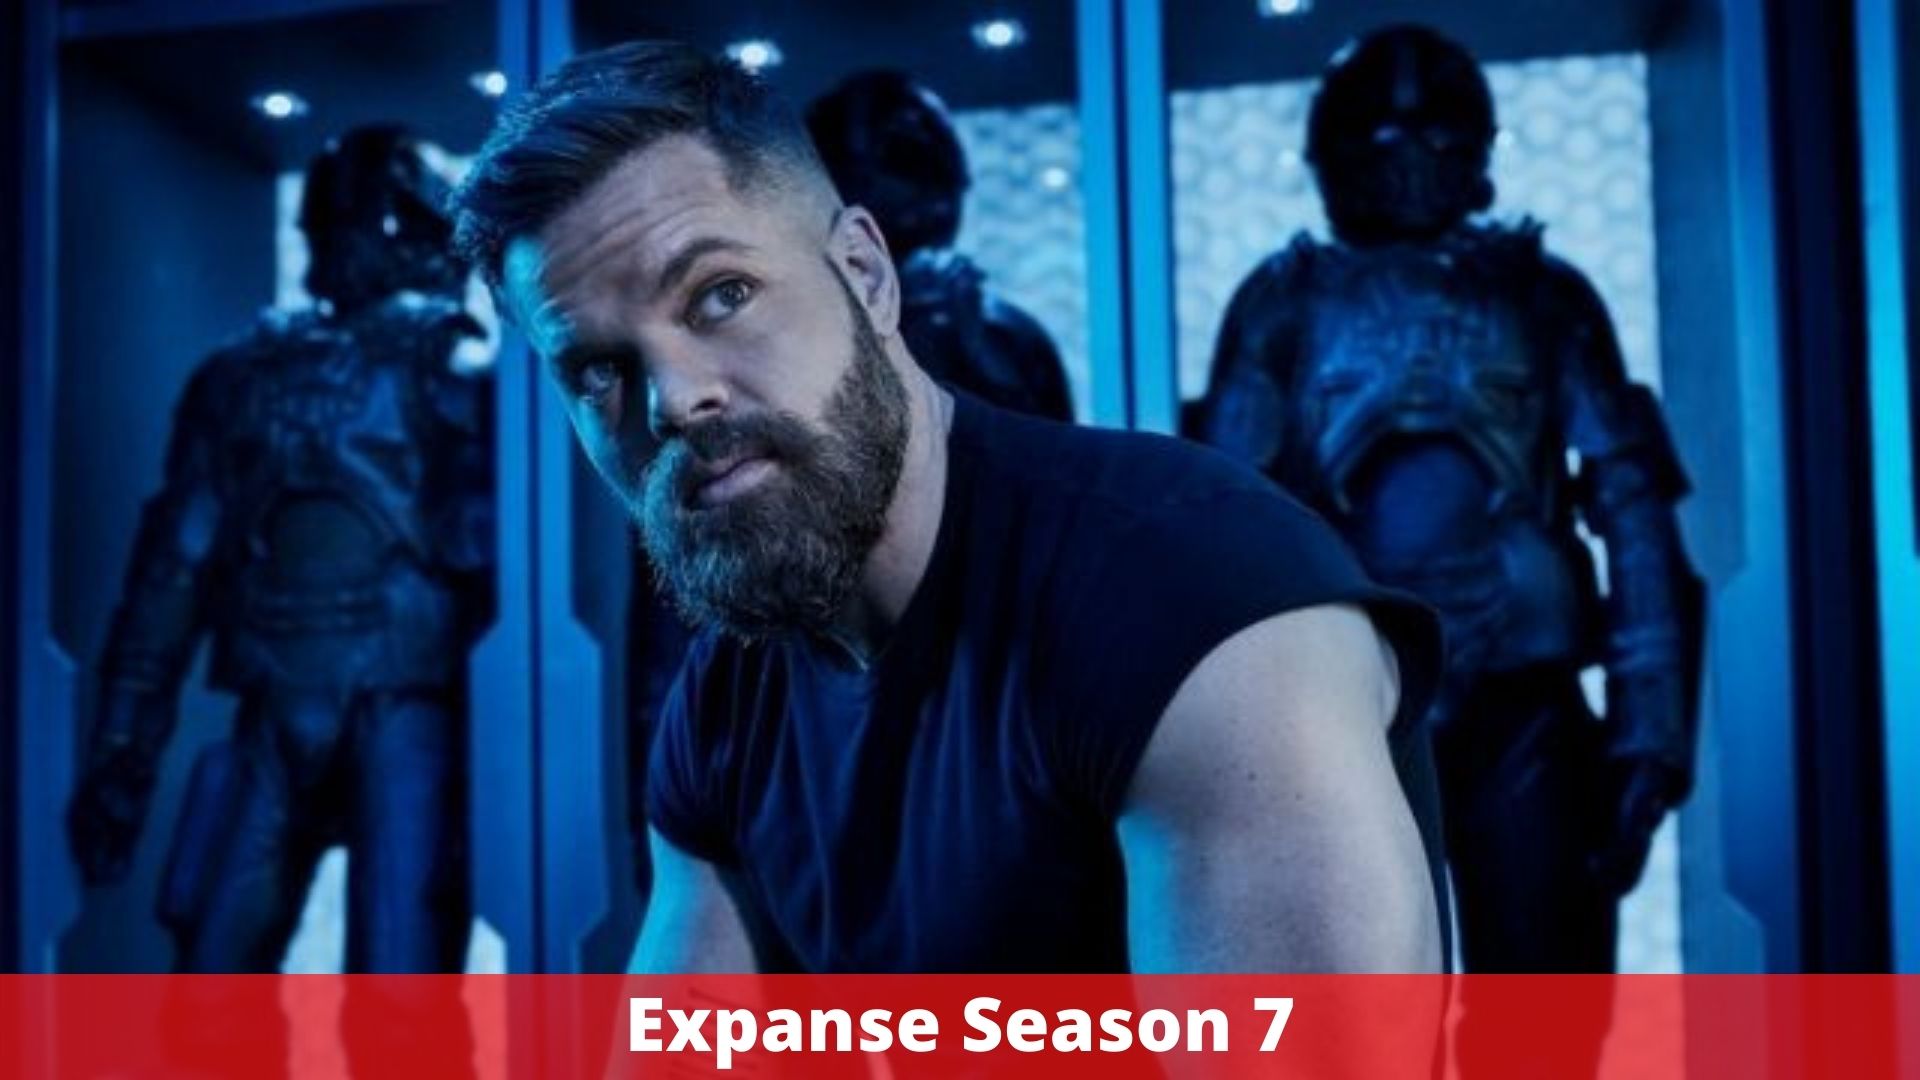 Expanse Season 7 - Release Date, Cast, Plot, And More!